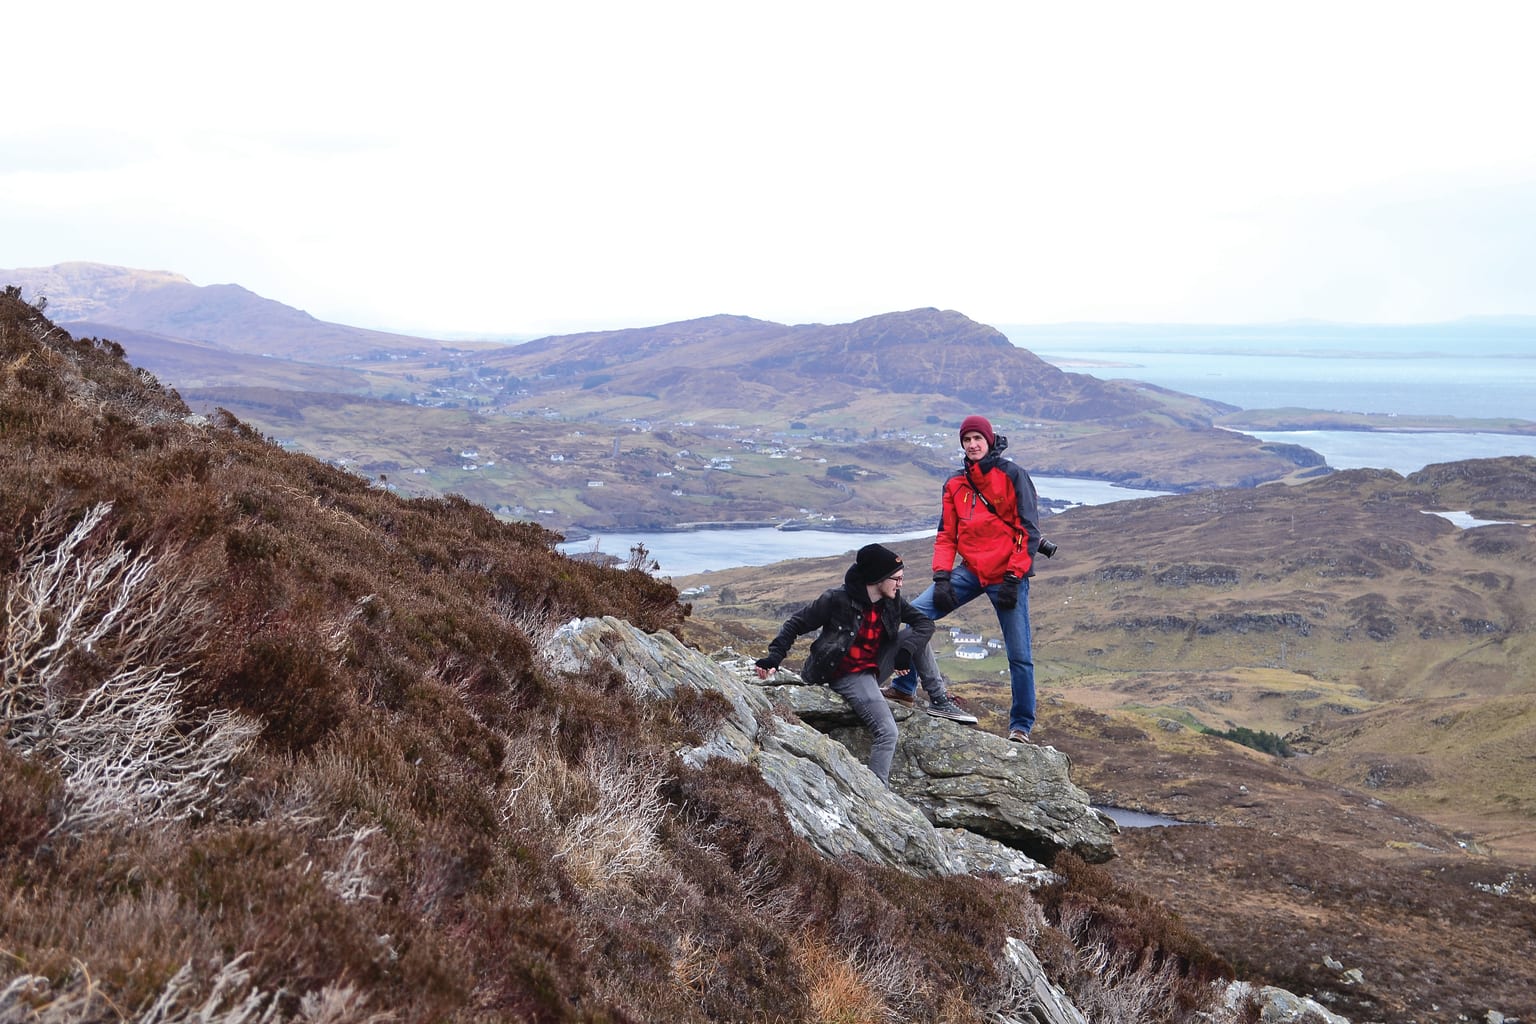 Two students on a mountain in Ireland.